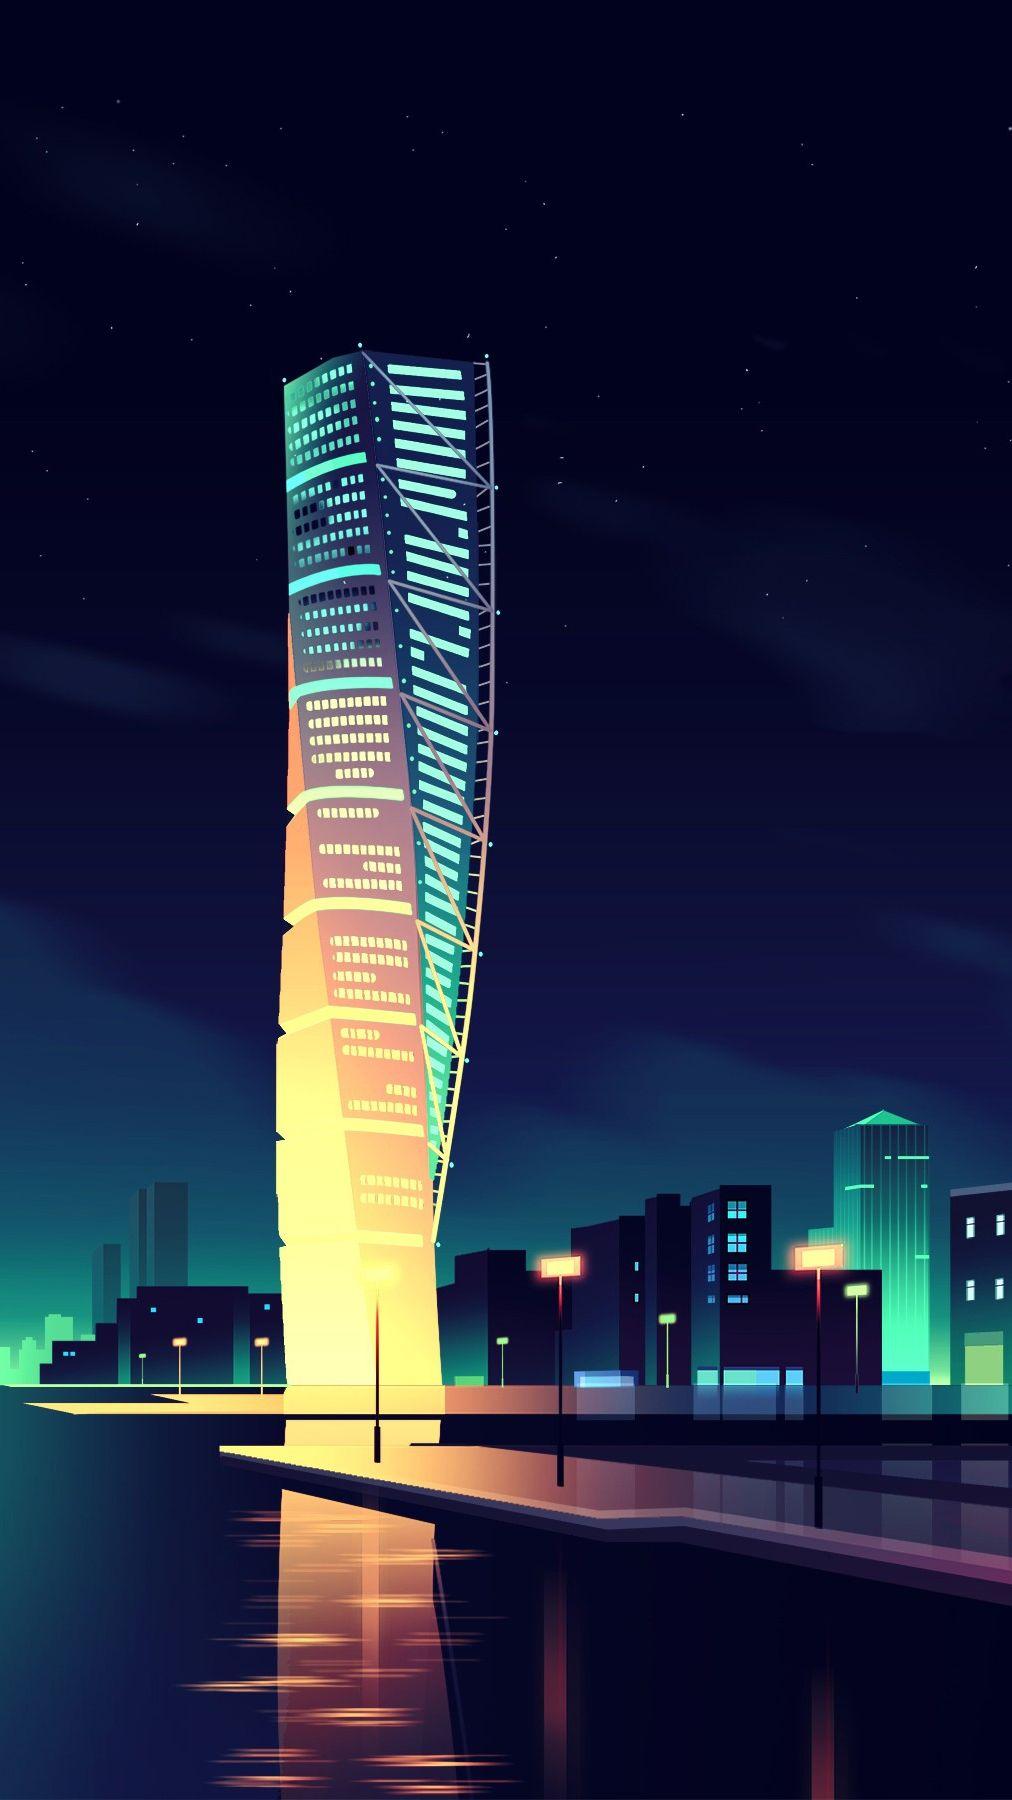 Animated Night City Wallpaper IPhone Wallpaper In 2019